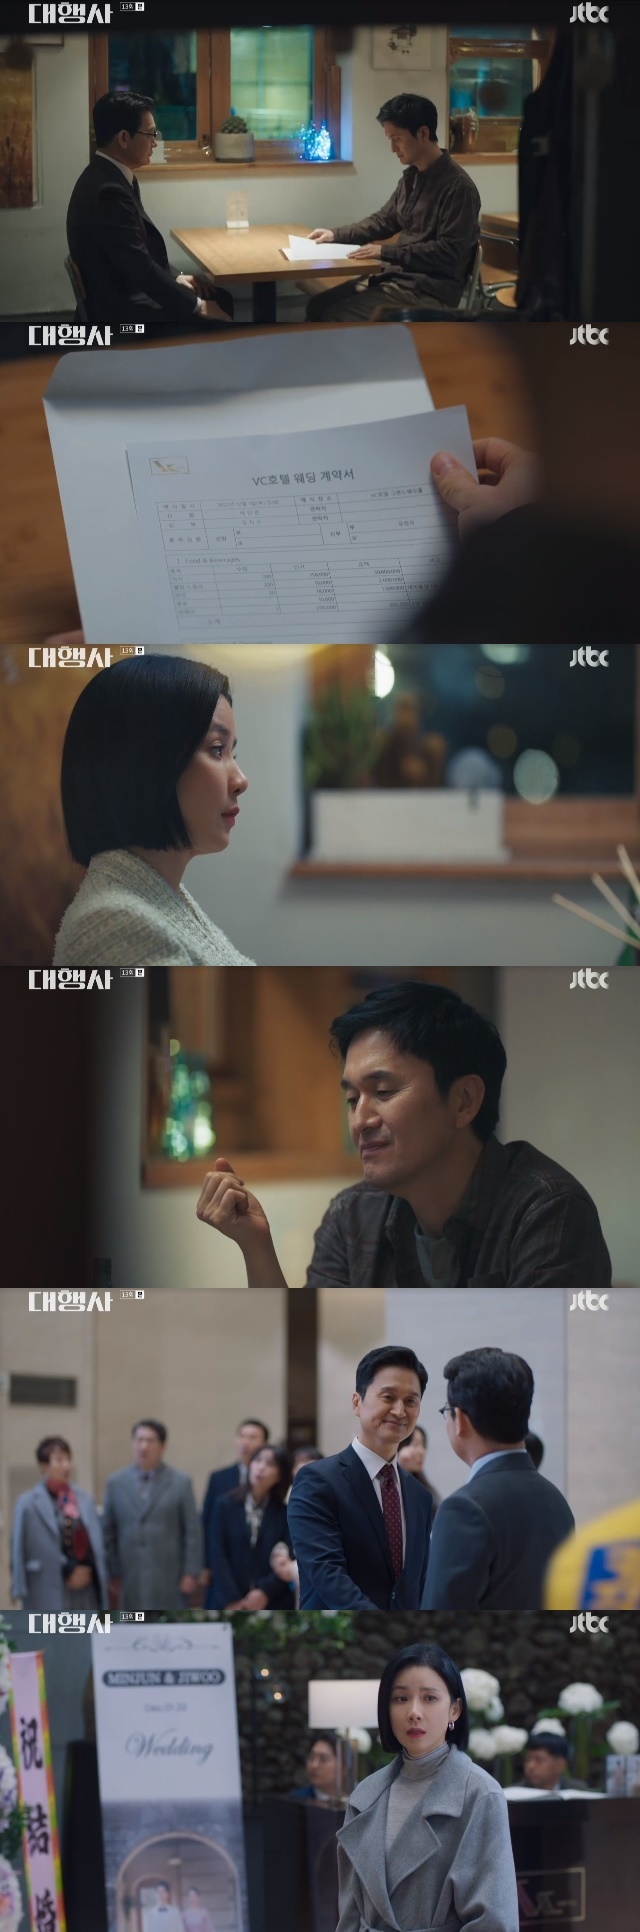 Lee Bo-young was betrayed by his senior Jang Hyun-sung who believed and followed.In the 13th episode of JTBCs Saturday-Sunday drama An Agency (playwright Song Soo-han, director Lee Chang-min), which aired on February 18, Jang Hyun-sung betrayed Lee Bo-young.On the day of the strong water, Kang Hanna (Son Na-eun) was rude to Park Yung-woo (Han Joon-woo) I approached Park Yung-woo.He asked Park Yung-woo to marry Kang Hanna, and offered him 300 billion won in cash and 100 percent stake in the company that manages affiliate buildings.Park Yung-woo said, I was worried for a while, but when I heard the vice presidents suggestion, my mind became clear. I will give you an answer soon.However, Park Yung-woo looked at Kang Hanna, who was lying alone on the bar table afterwards, and indirectly showed what he would choose to say to himself, Get up and stand up now.Jung Soo-jung said, You told me before.I dont have the ability to prove it to you. I cant come up with ideas like other people. I dont have the ability to show you anything, but I do have the ability not to do anything.I thought the best thing I could do was not to say. The orphan, who got to know Jung Soo-jungs mind, also asked, Why didnt you tell Choi Sang-moo? If you told him what you knew, you could have been a full-time employee.Jung Soo-jung said, I do not want to be a full-time employee until I hurt others. Joe is (Jeon Hye-jin) I did not want to disappoint my teammates who were good to me.Feeling sincere, the orphan promised, I will protect Choi Sang-moos promise to you. If I have the ability to do so.At this time, Jung Soo-jung confessed, But there is one thing that I can not help seeing because the best man is scared to leave the company right away.At that time, Choi Chang-soo (Jo Sung-ha) approached the prosecutor who had been swallowed up by the orphans as a jewel of Woo-Won Group chairman. The enemy of the enemy is comrade.I do not think Ill lose anything because I know each other. The prosecutor showed a good feeling at the end of choi chang-soo. Then I think Ill have something to give you soon.At that time, Choi asked me, What can you do for me? Choi Chang-soo promised, I will be a speaker. I will ring the information so that everyone can know.Park Yung-woo realized that the time had come for him to tell Kang Hanna about his decision when he was appointed to the VC Group secretarys office. Park Yung-woo replied by submitting his resignation to strong water.At the same time, Kang Hanna was distressed by what happened to Park Yung-woo. To Kang Hanna, Cho Moon-ho (Park Ji-il) said, Accept it because it is all the result of your words and actions.If you go on a different path from others, you should be prepared to have a different experience from others. Park Yung-woo returned to Kang Hanna to announce his resignation, followed by Then Ill leave for good, to which Kang Hanna replied, If you go like this, I wont see you forever, and if you dont have a spur, theres no one on my side in the world.Park Yung-woo said, Park Yung-woo is the only person I can trust 100%. Park Yung-woo said, I can take everything I have. I hope you learned a lot this time.There is a relationship that does not create synergy when mixed. Kang Hanna swallowed the last banana milk Park Yung-woo gave him.On the other hand, choi chang-soo was ignored by strong water, and Yoo Jung-suks daughter married something. He booked a VC hotel wedding room and started Plan B.After that, Choi Chang-soo visited Yoo Jeong-seok and suggested, Anyway, I cant raise 50% of the sales within six months of being an orphan. So come join the company. Isnt it better if I represent you and you become the next head of production?Yoo Jung-seok replied, Do not come here again because I will send it back to you for 10 million won. Choi Chang-soo continued to persuade him to push the VC hotel wedding contract.Choi Chang-soo said, Im getting married to my daughter. I want to sit at my only daughters wedding as a pub dad. I want to sit as an agency executive at a large company.You are more important than your daughter. I will keep my first promise to Goh Sang-moo. I will be a university professor. Goh Sang-moo is a college professor and you are not bad with the next production director.